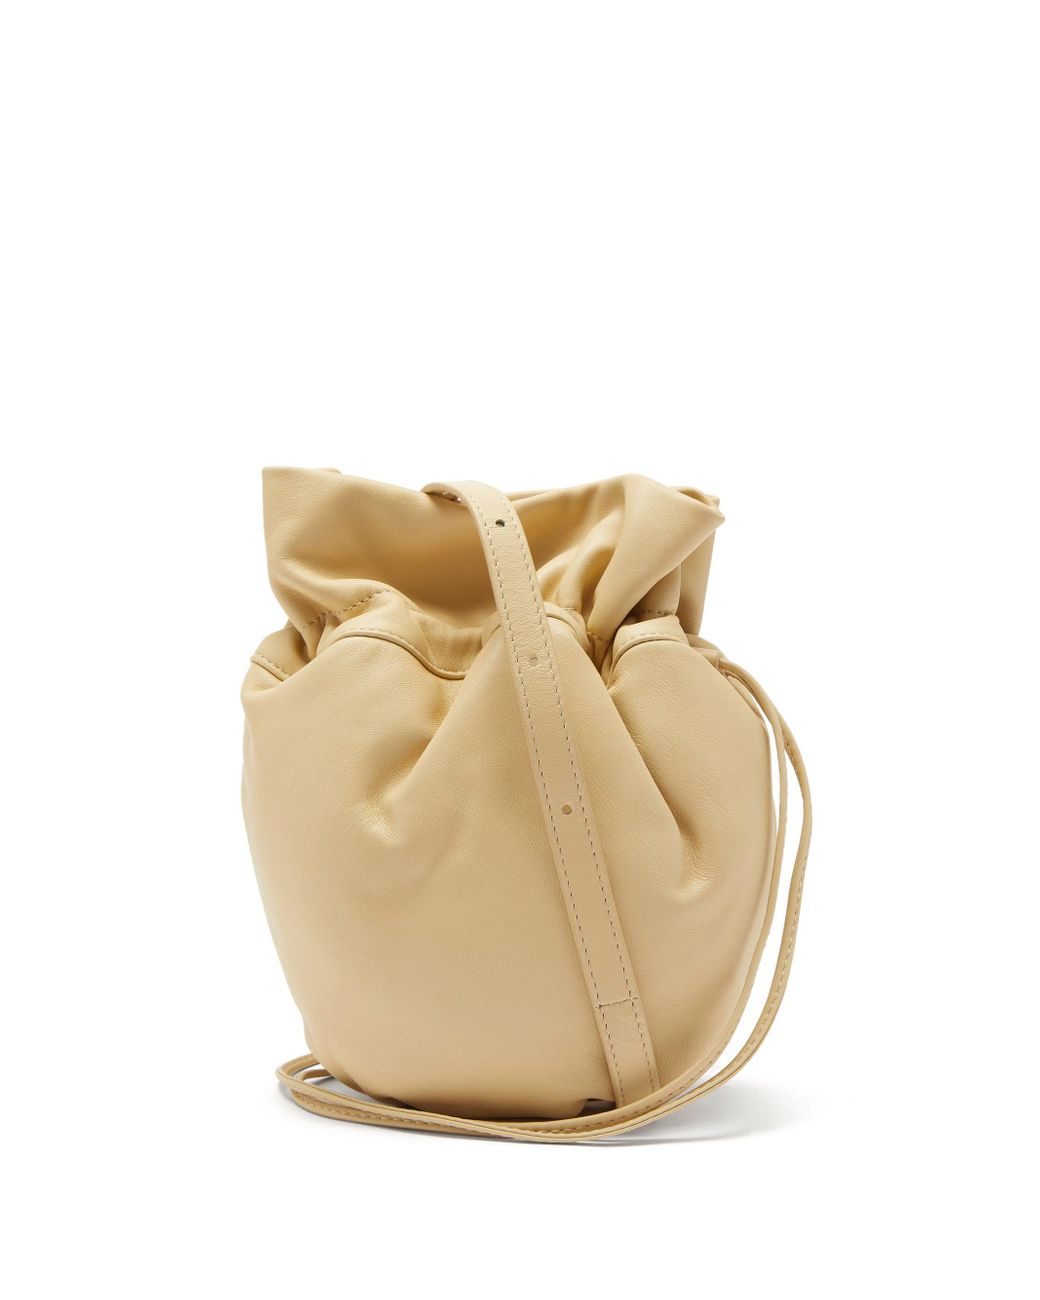 Lemaire Glove Drawstring Leather Cross-body Bag in Beige (Natural ...